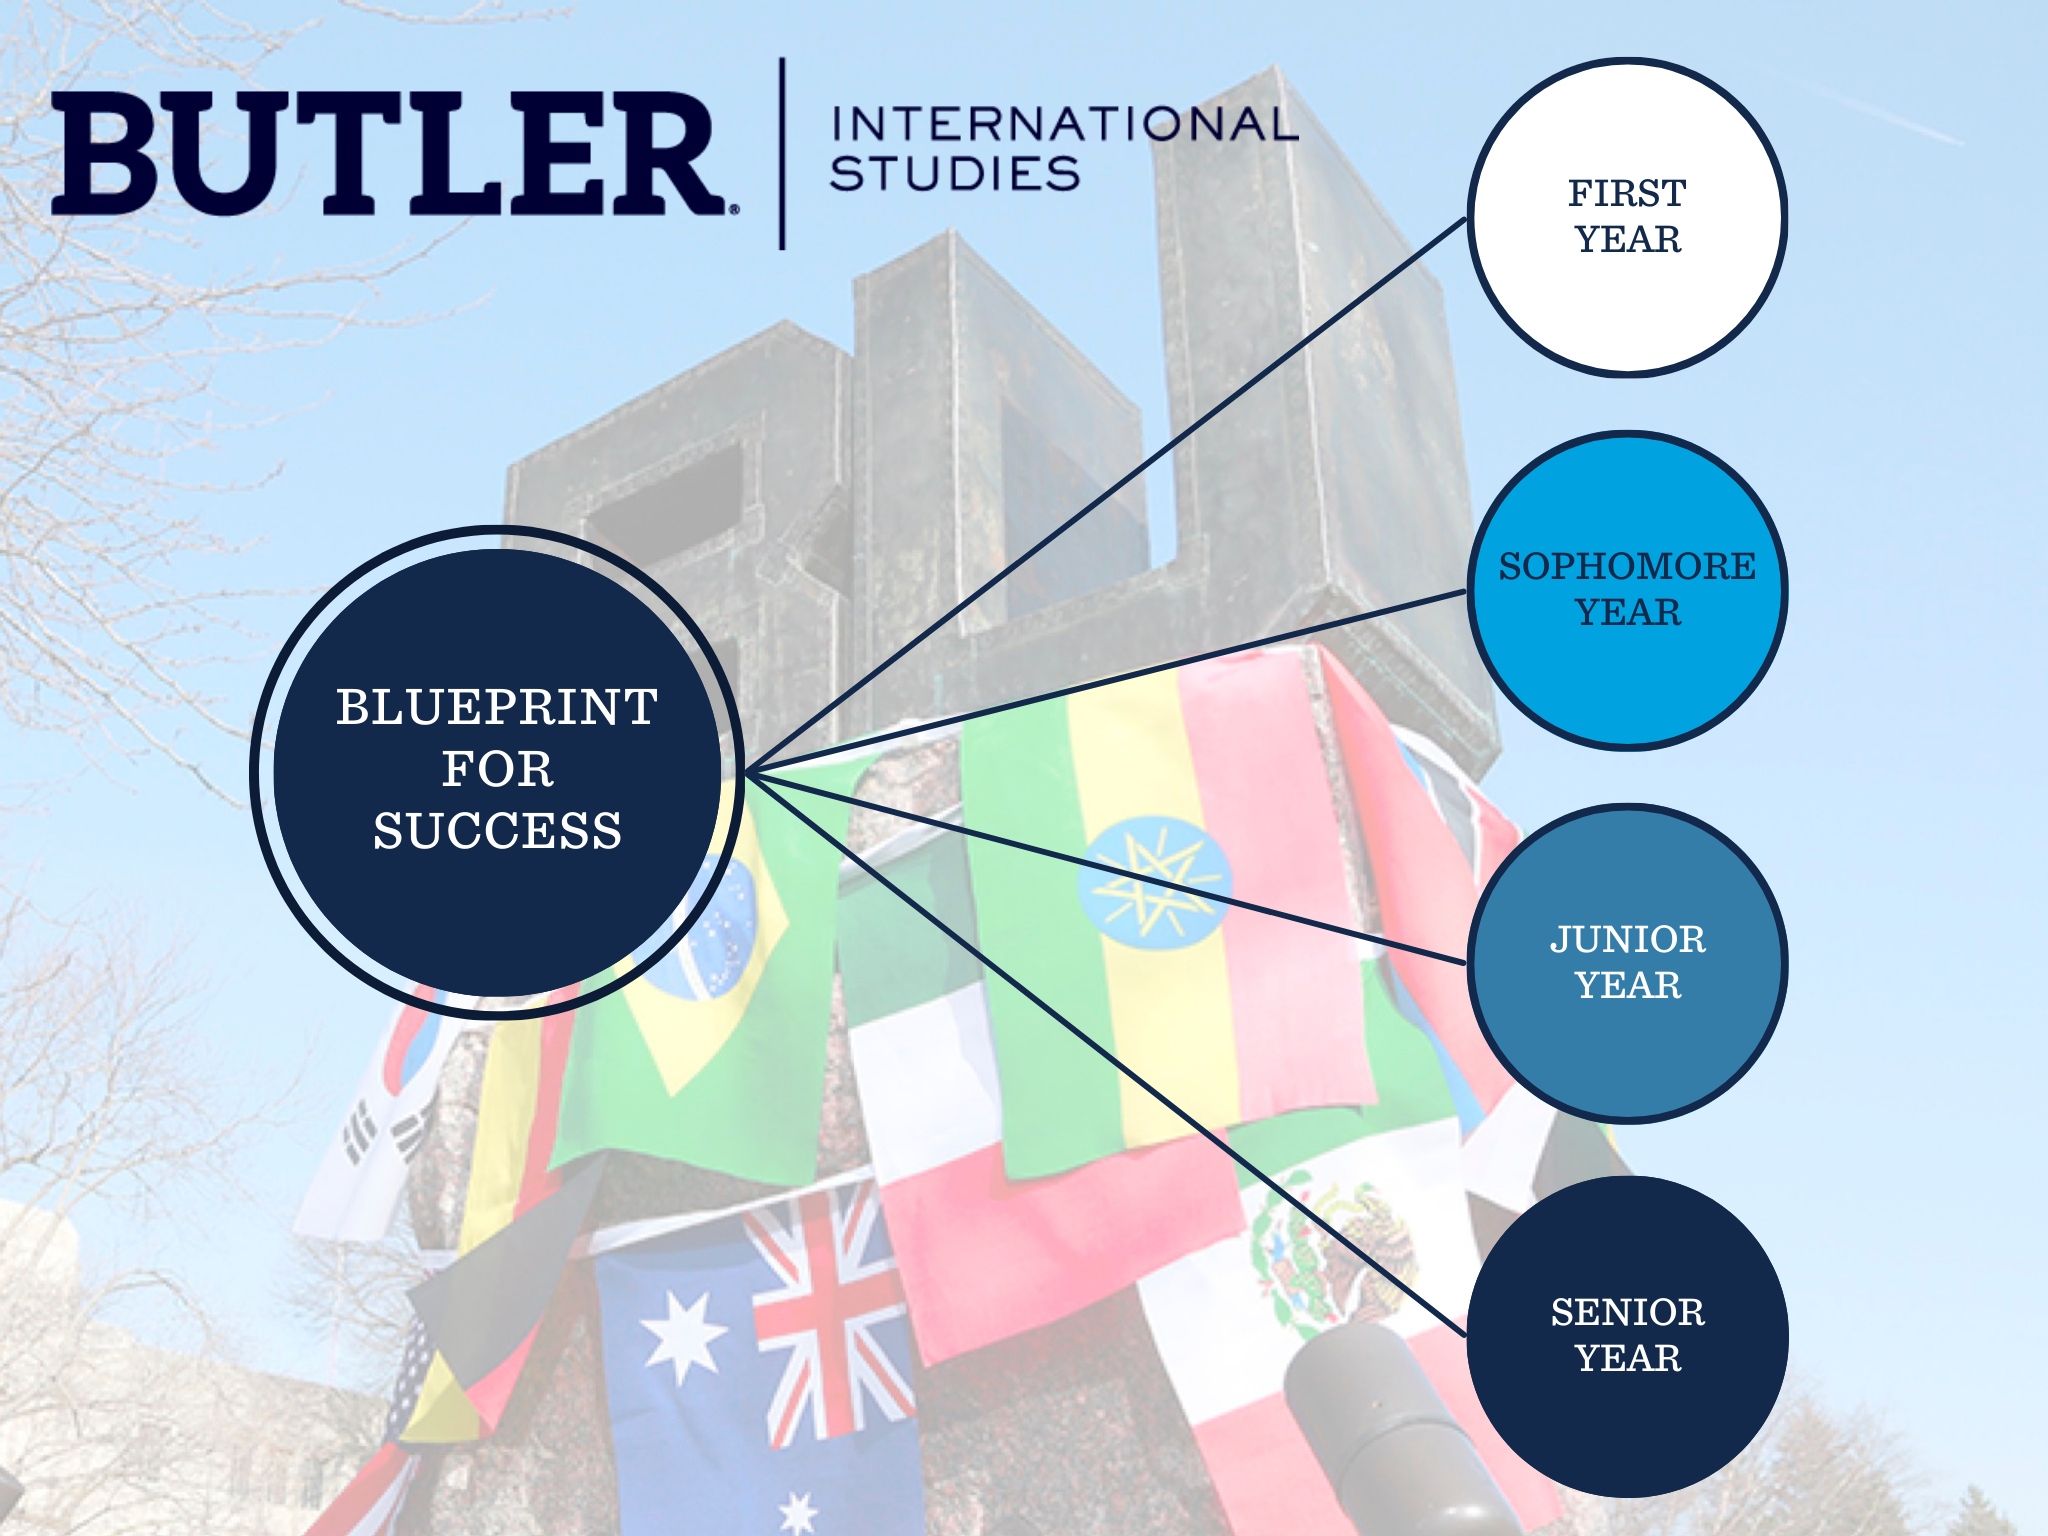 International Studies Blueprint for Success Primary Image stating First Year, Sophomore Year, Junior Year, Senior Year